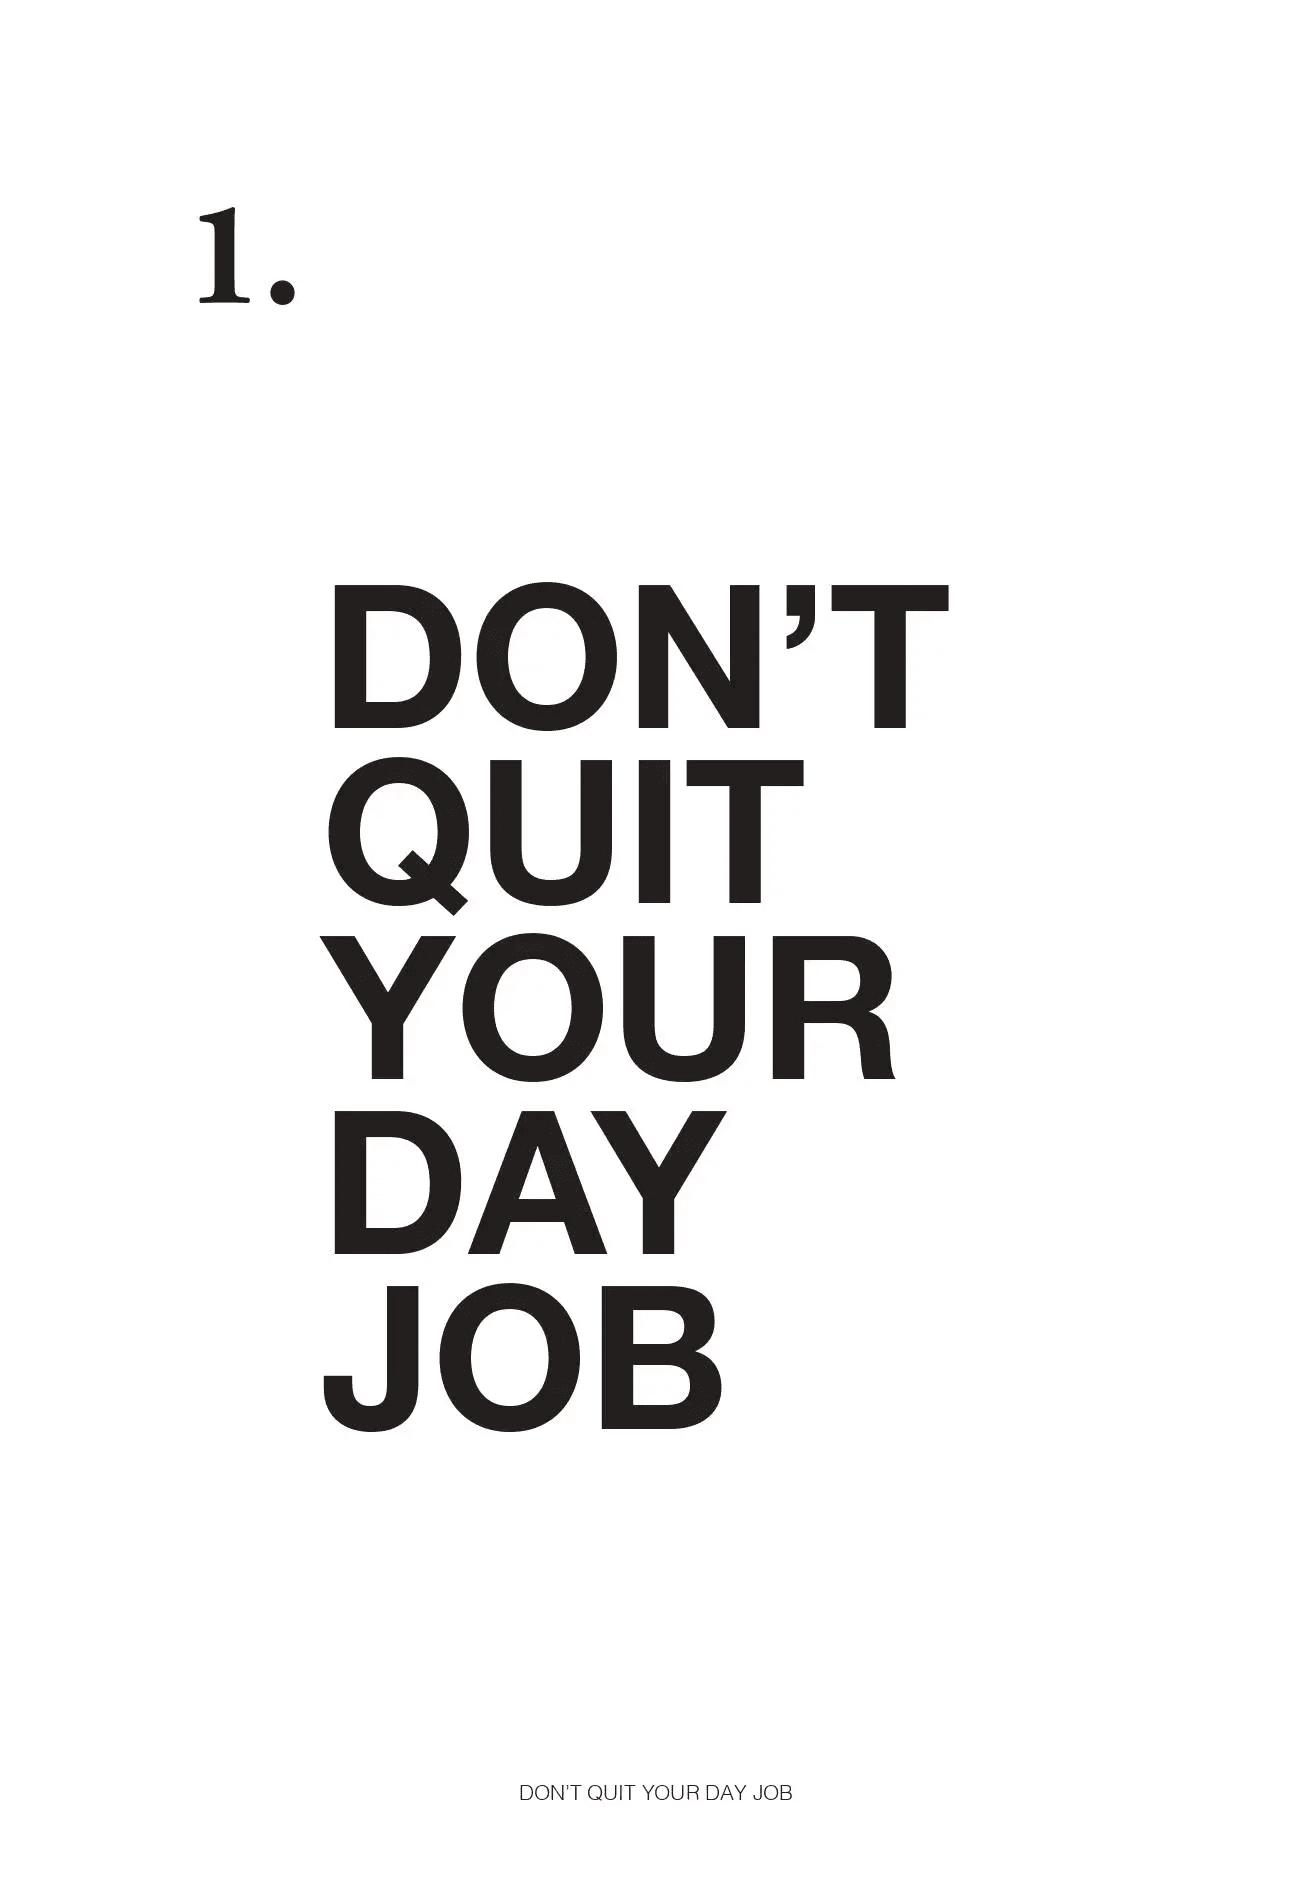 1. DON’T QUIT YOUR DAY JOB